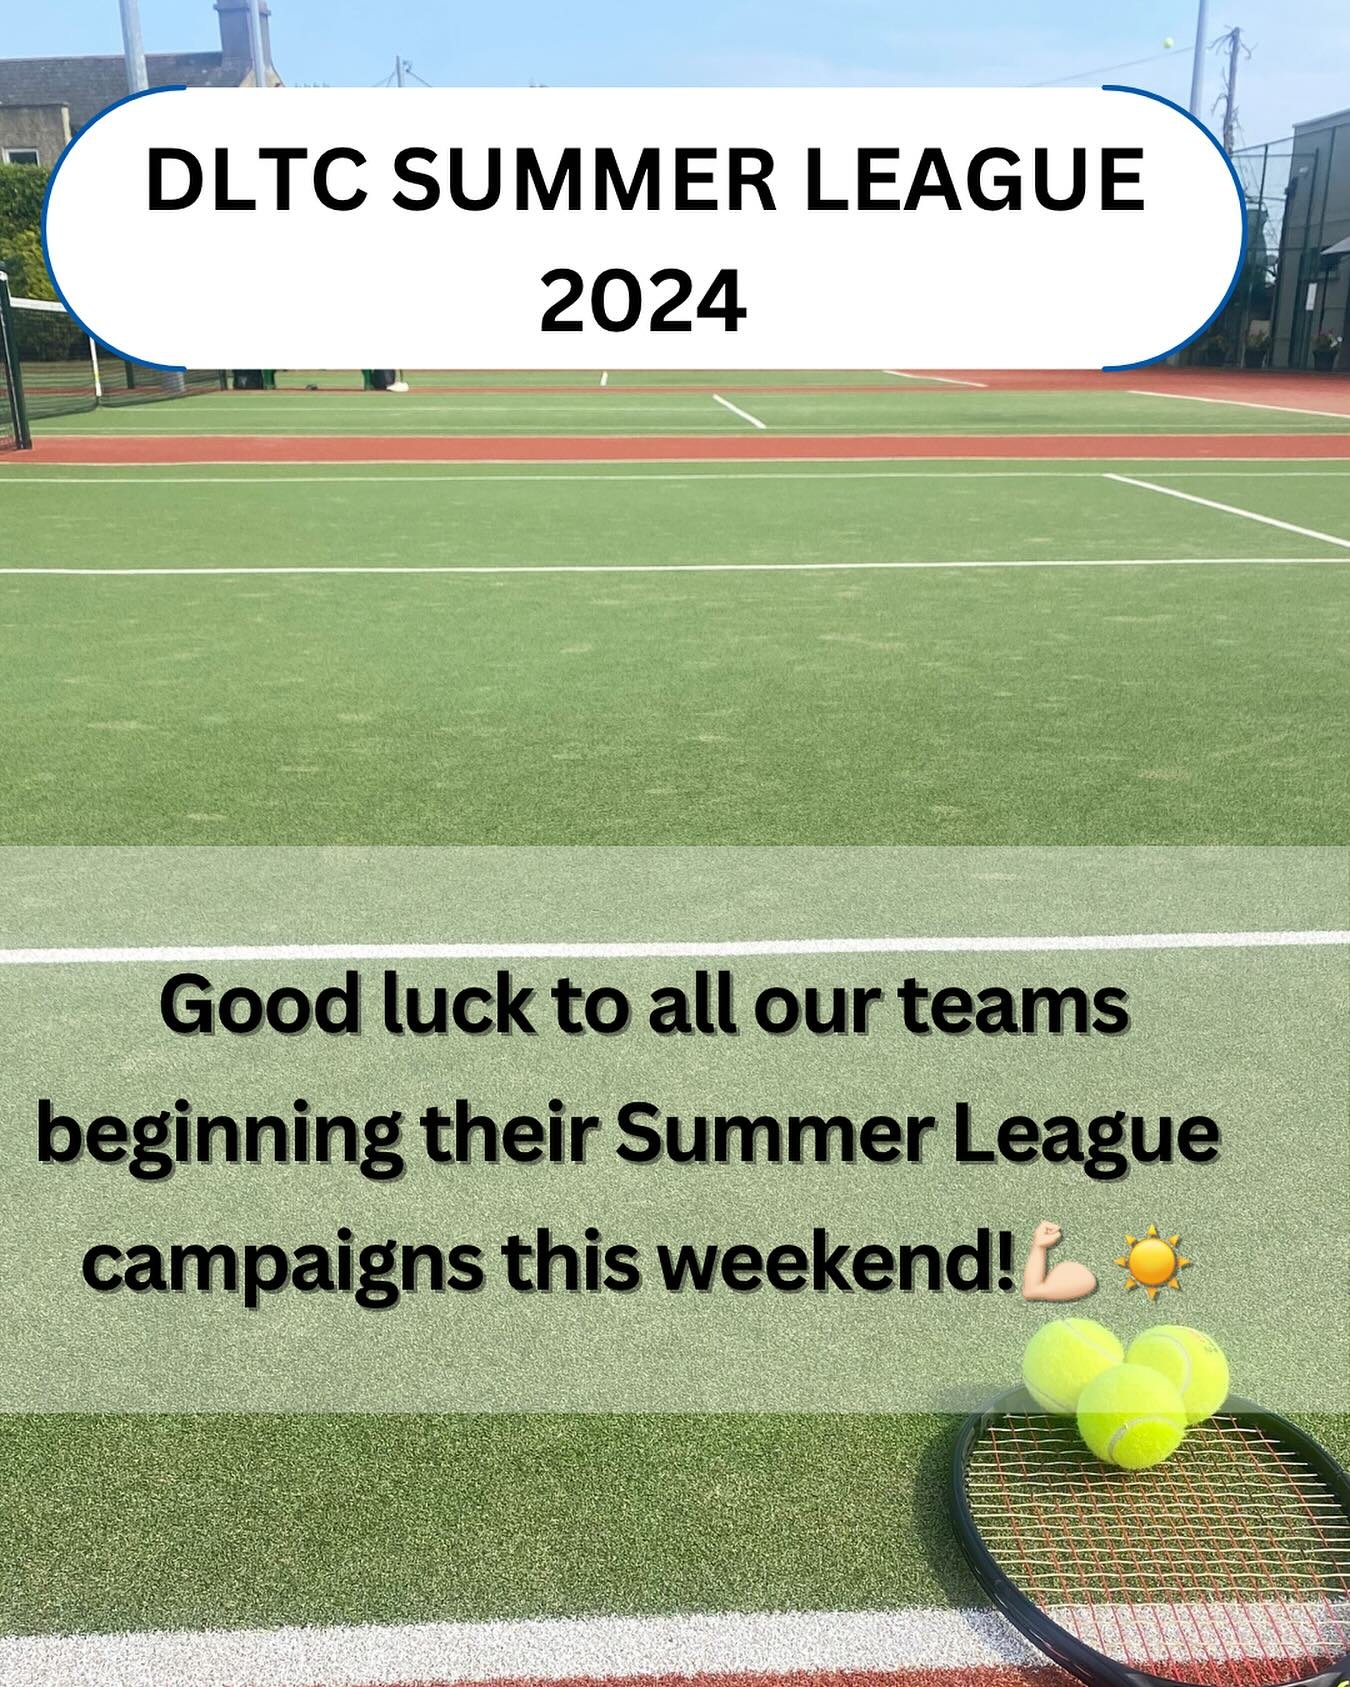 Good luck to our 10 teams kicking off their Summer League campaigns this weekend. 💪🏻 ☀️